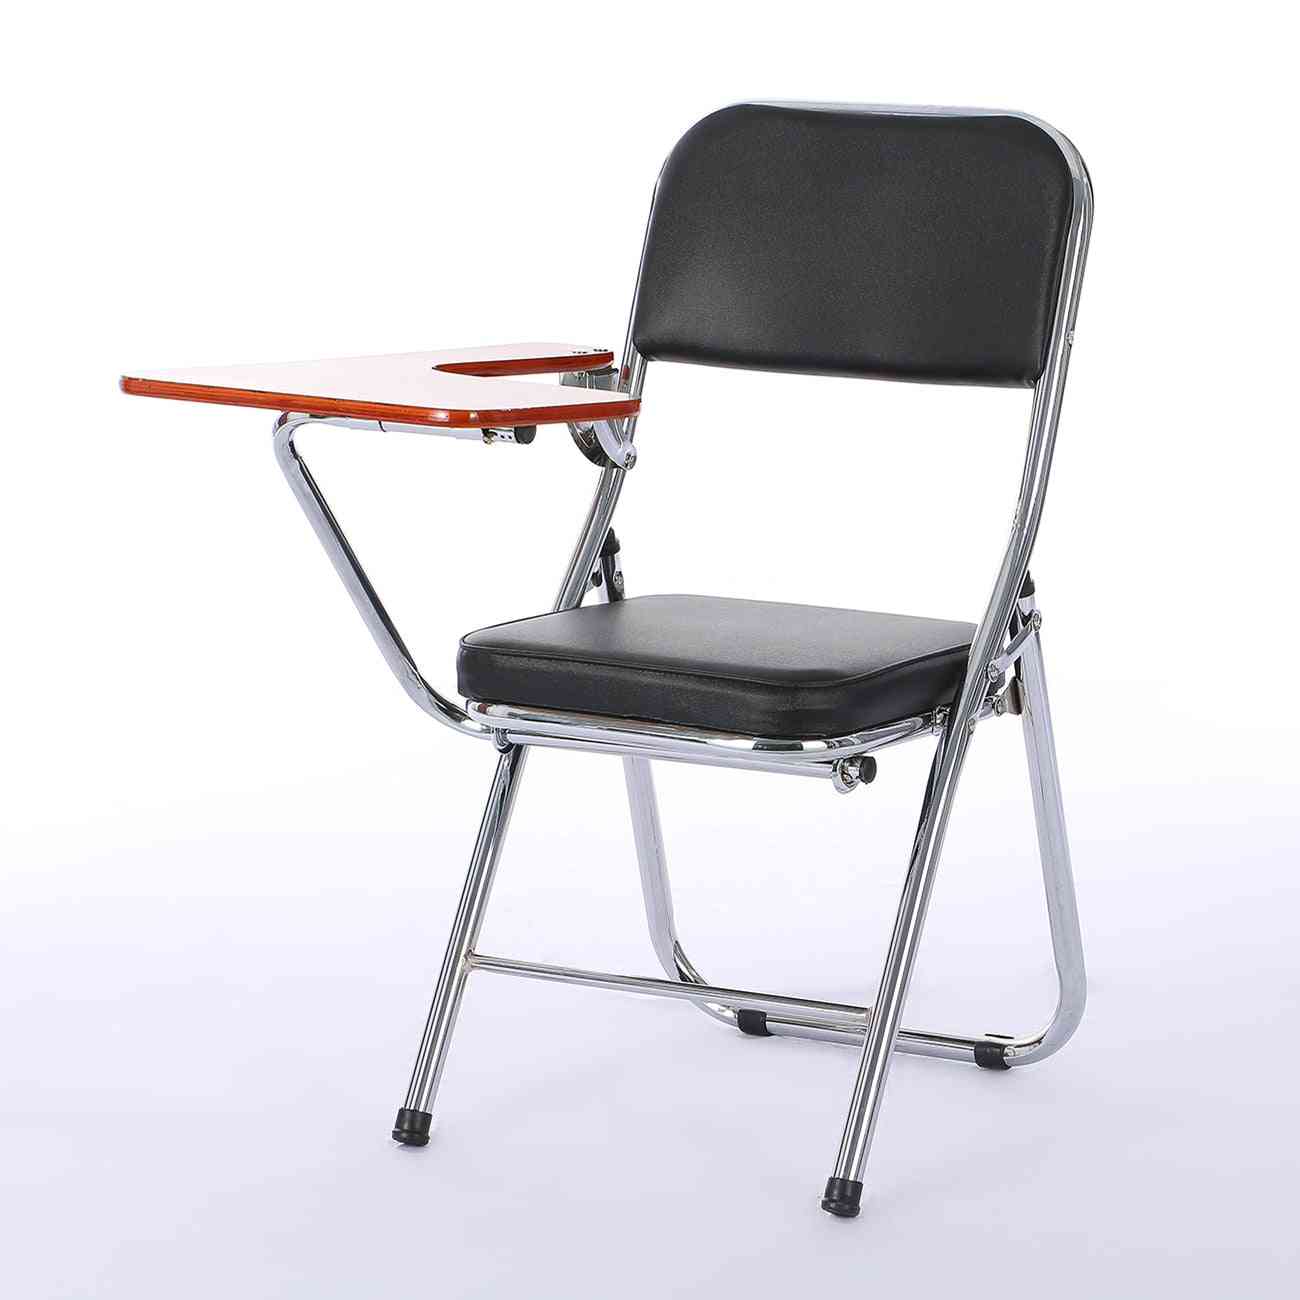 Staff Training Chair With Writing Board For Student